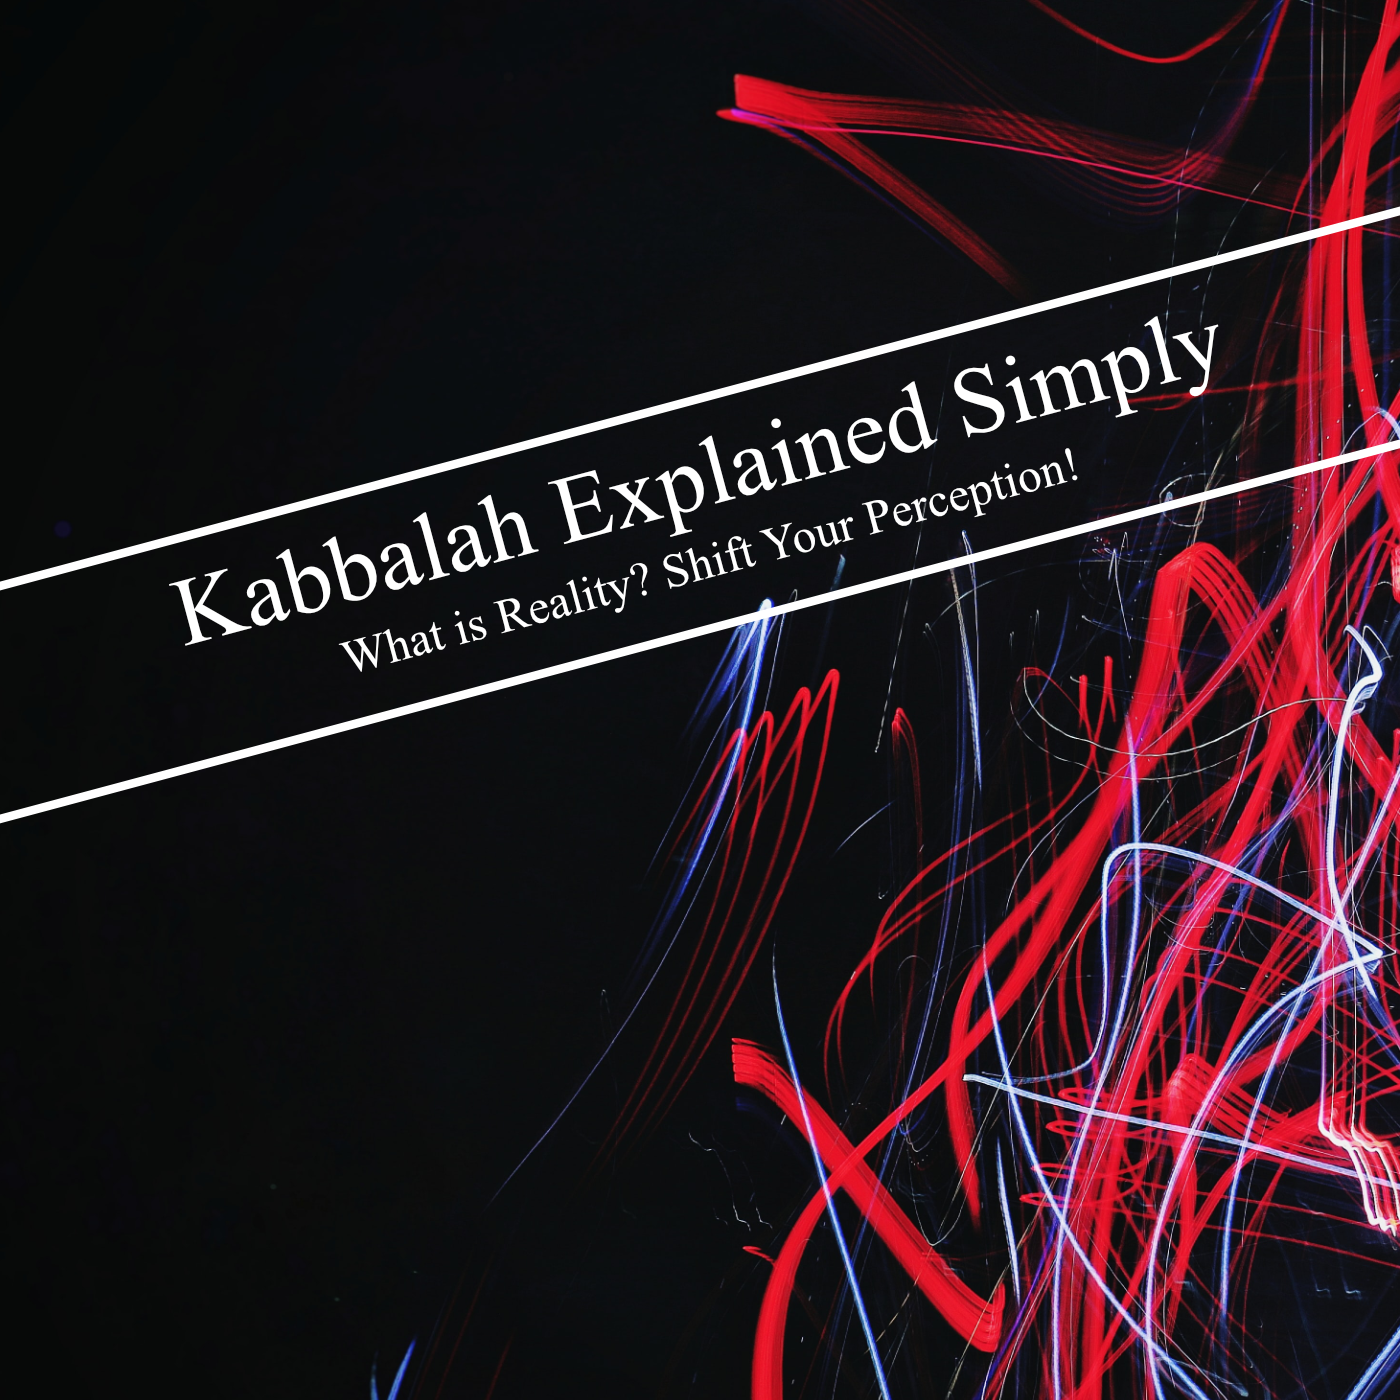 Kabbalah Explained Simply - What is Reality? Shift Your Perception!